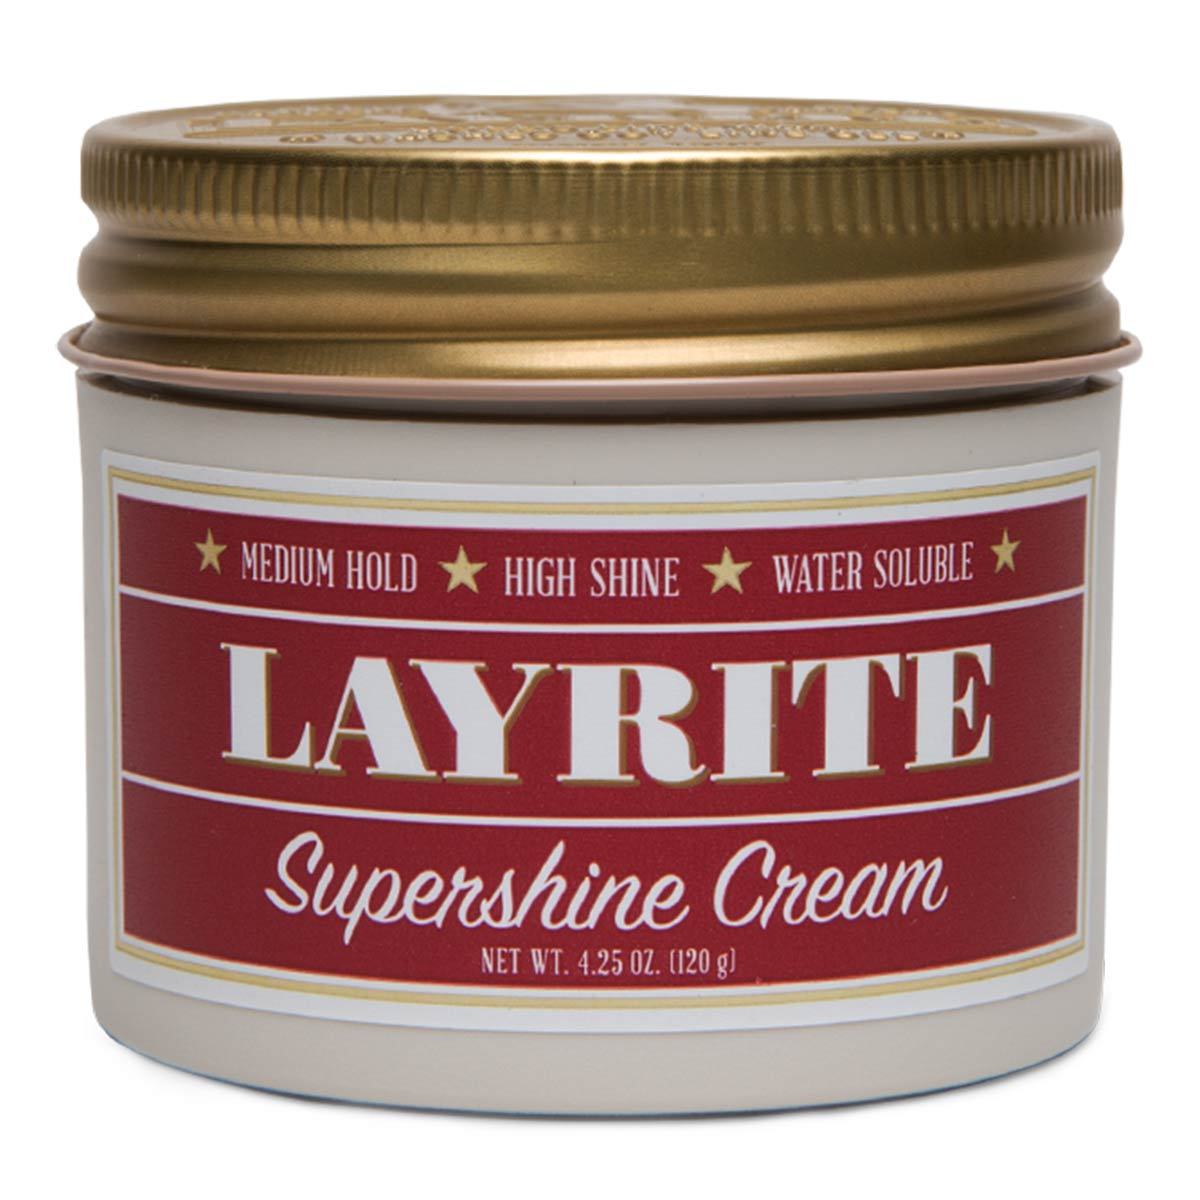 Primary image of Layrite Super Shine Pomade